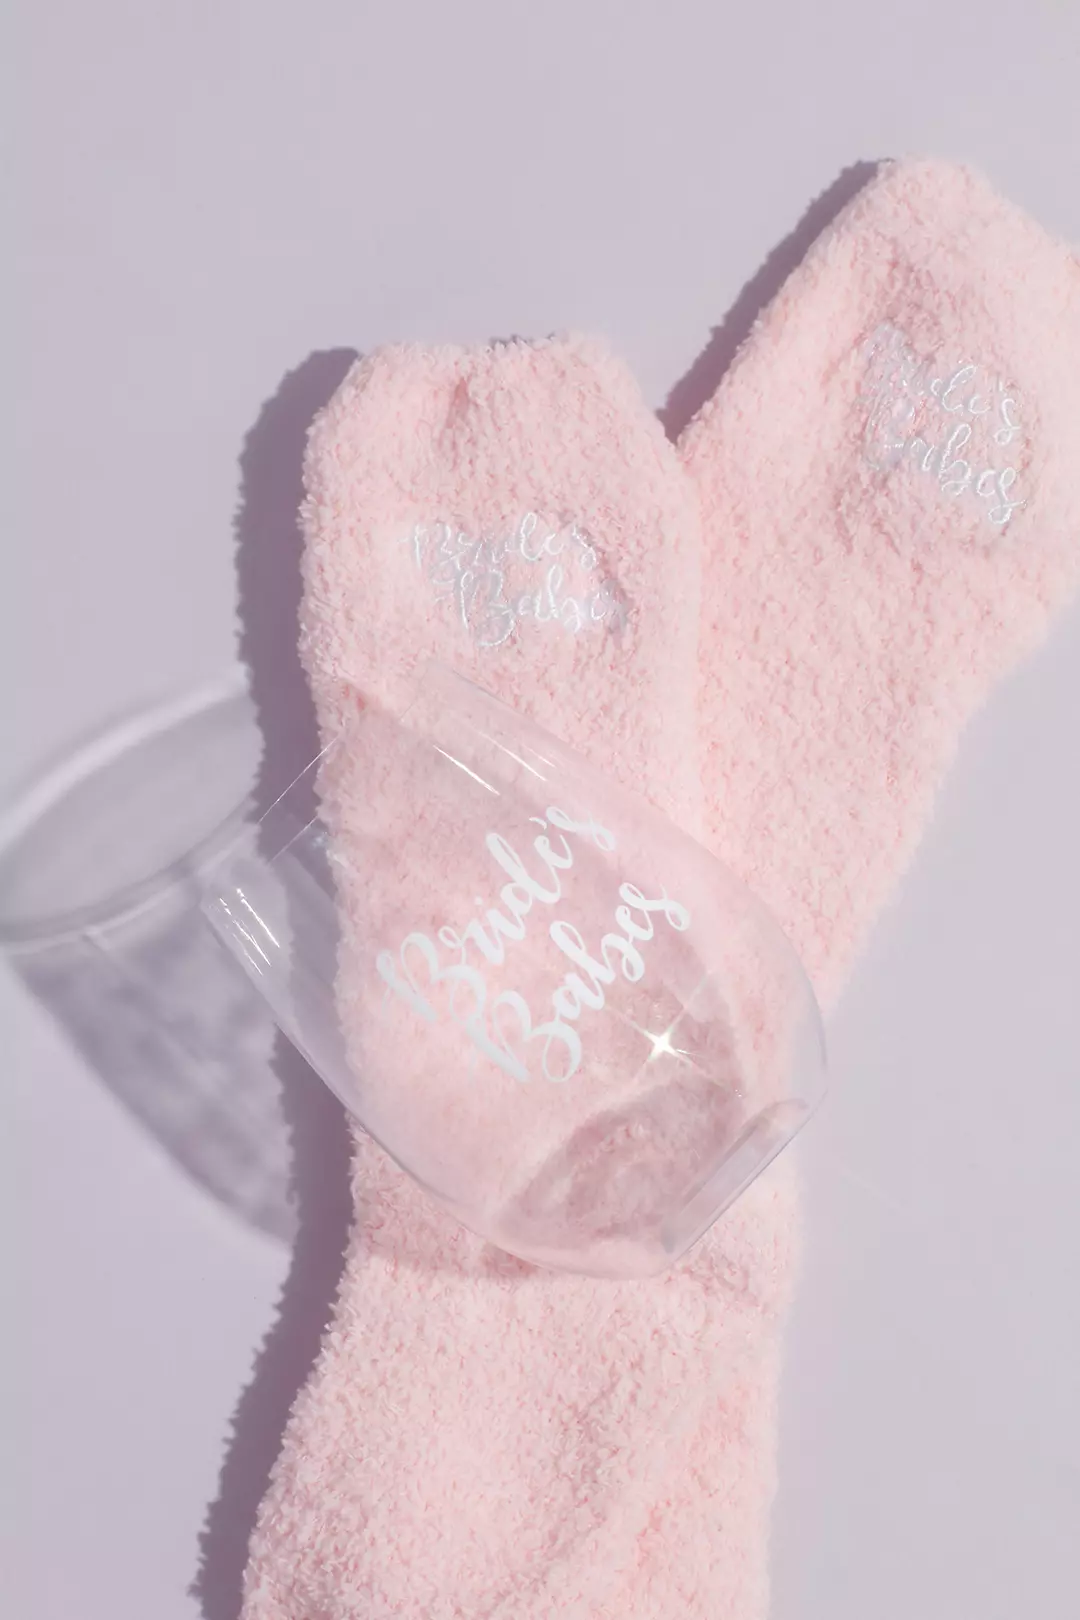 Bride Babes Wine Glass and Fuzzy Socks Gift Set Image 2